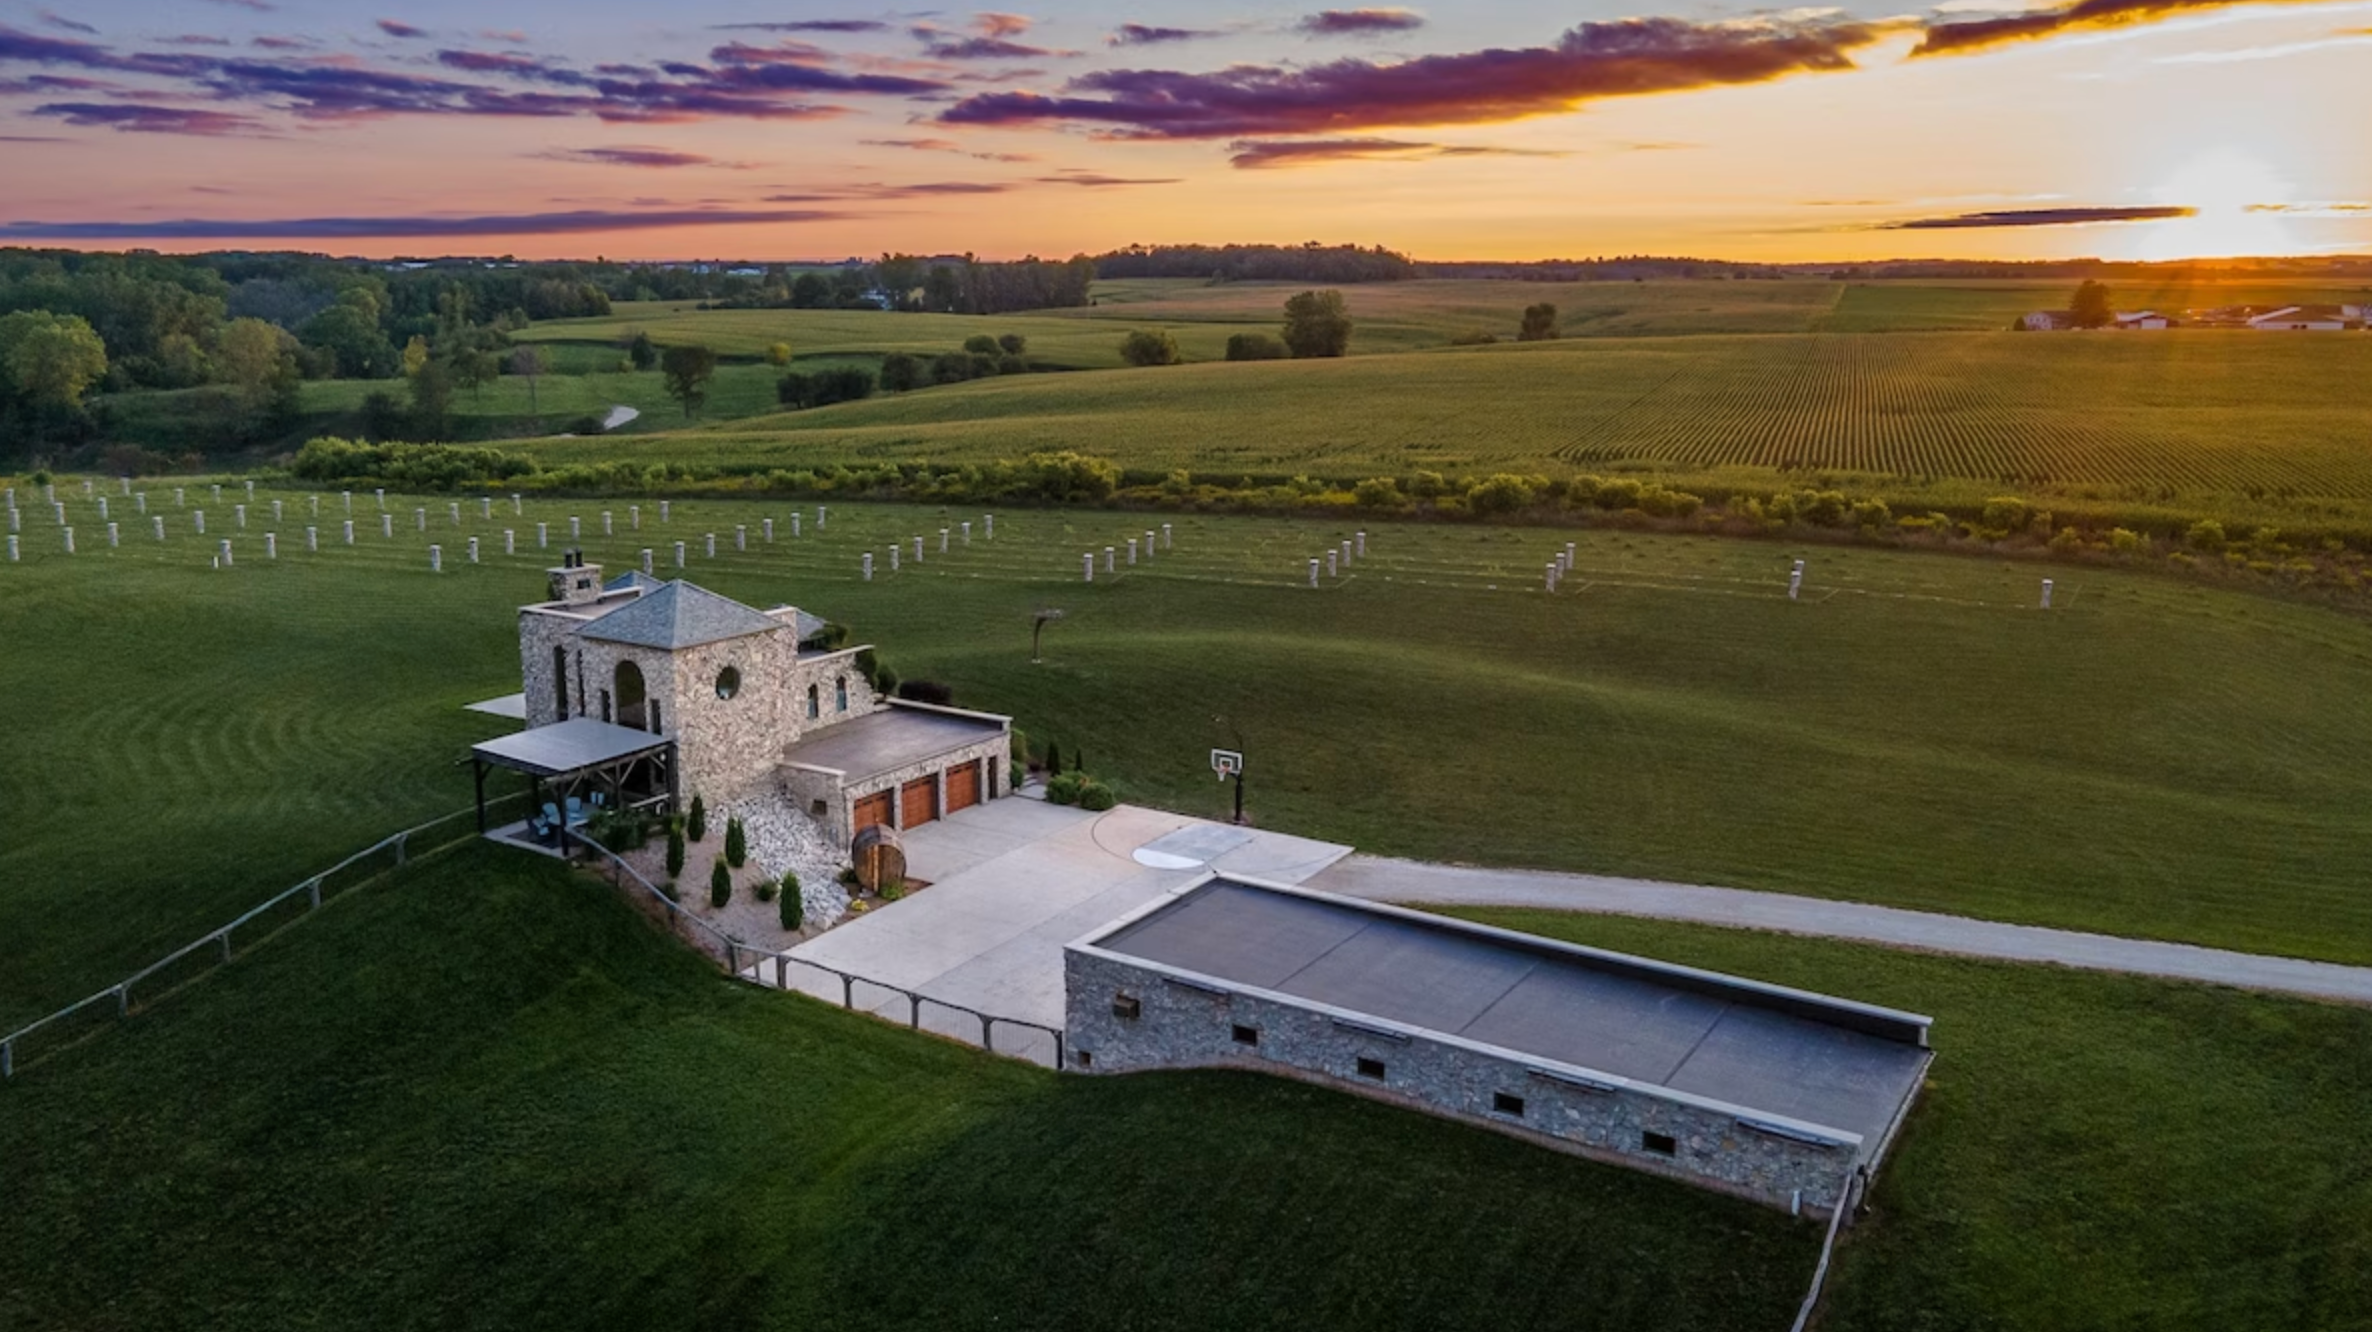 For a slice of Tuscany in the Midwest, look no further than this newly opened, opulent stone castle on a vineyard. The four-bedroom Wisconsin mansion is brimming with luxurious and magical details, including a gorgeous mahogany front door, a baby grand piano, 400 grape vines planted on the grounds, a show-stopping spiral staircase, a home theater, and a wine hall. Yes, a wine hall. The castle can be booked as a wedding or event venue, too. $1111, Airbnb (starting price). <a href="https://www.airbnb.com/rooms/616473242380750899">Get it now!</a><p>Sign up to receive the latest news, expert tips, and inspiration on all things travel</p><a href="https://www.cntraveler.com/newsletter/the-daily?sourceCode=msnsend">Inspire Me</a>